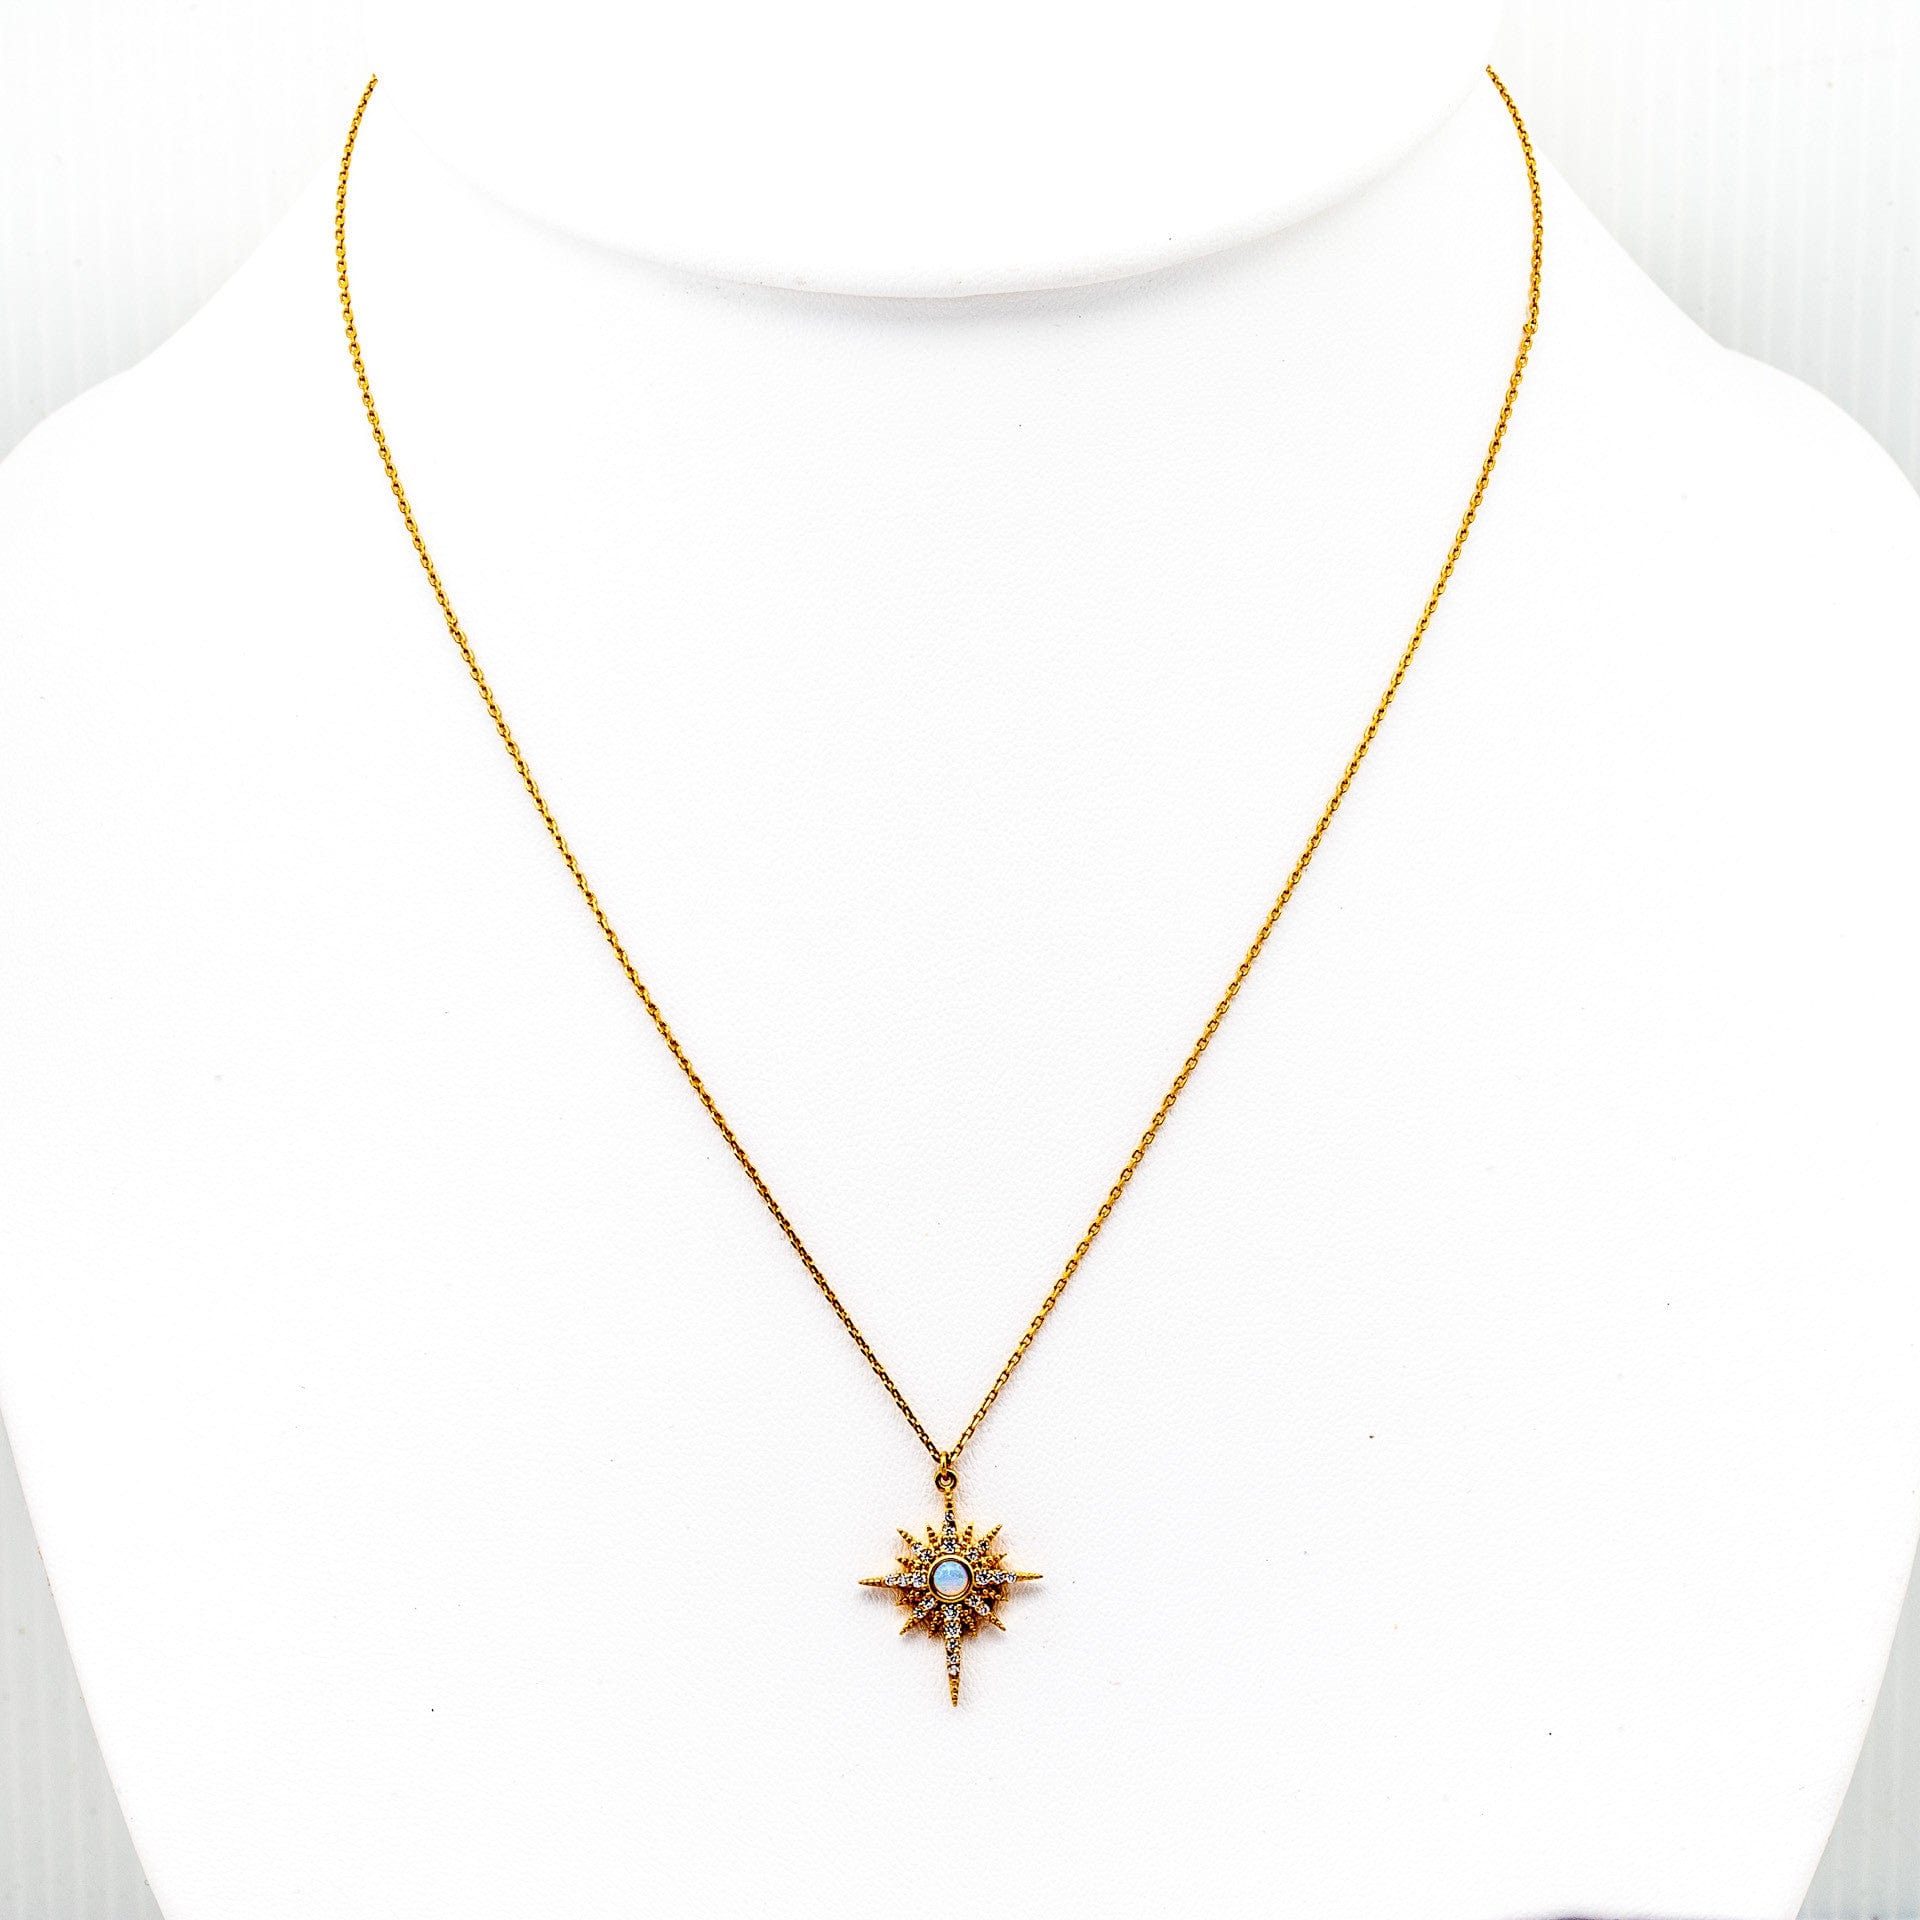 TAI JEWELRY Necklace Gold Starburst With Opal Stone Center